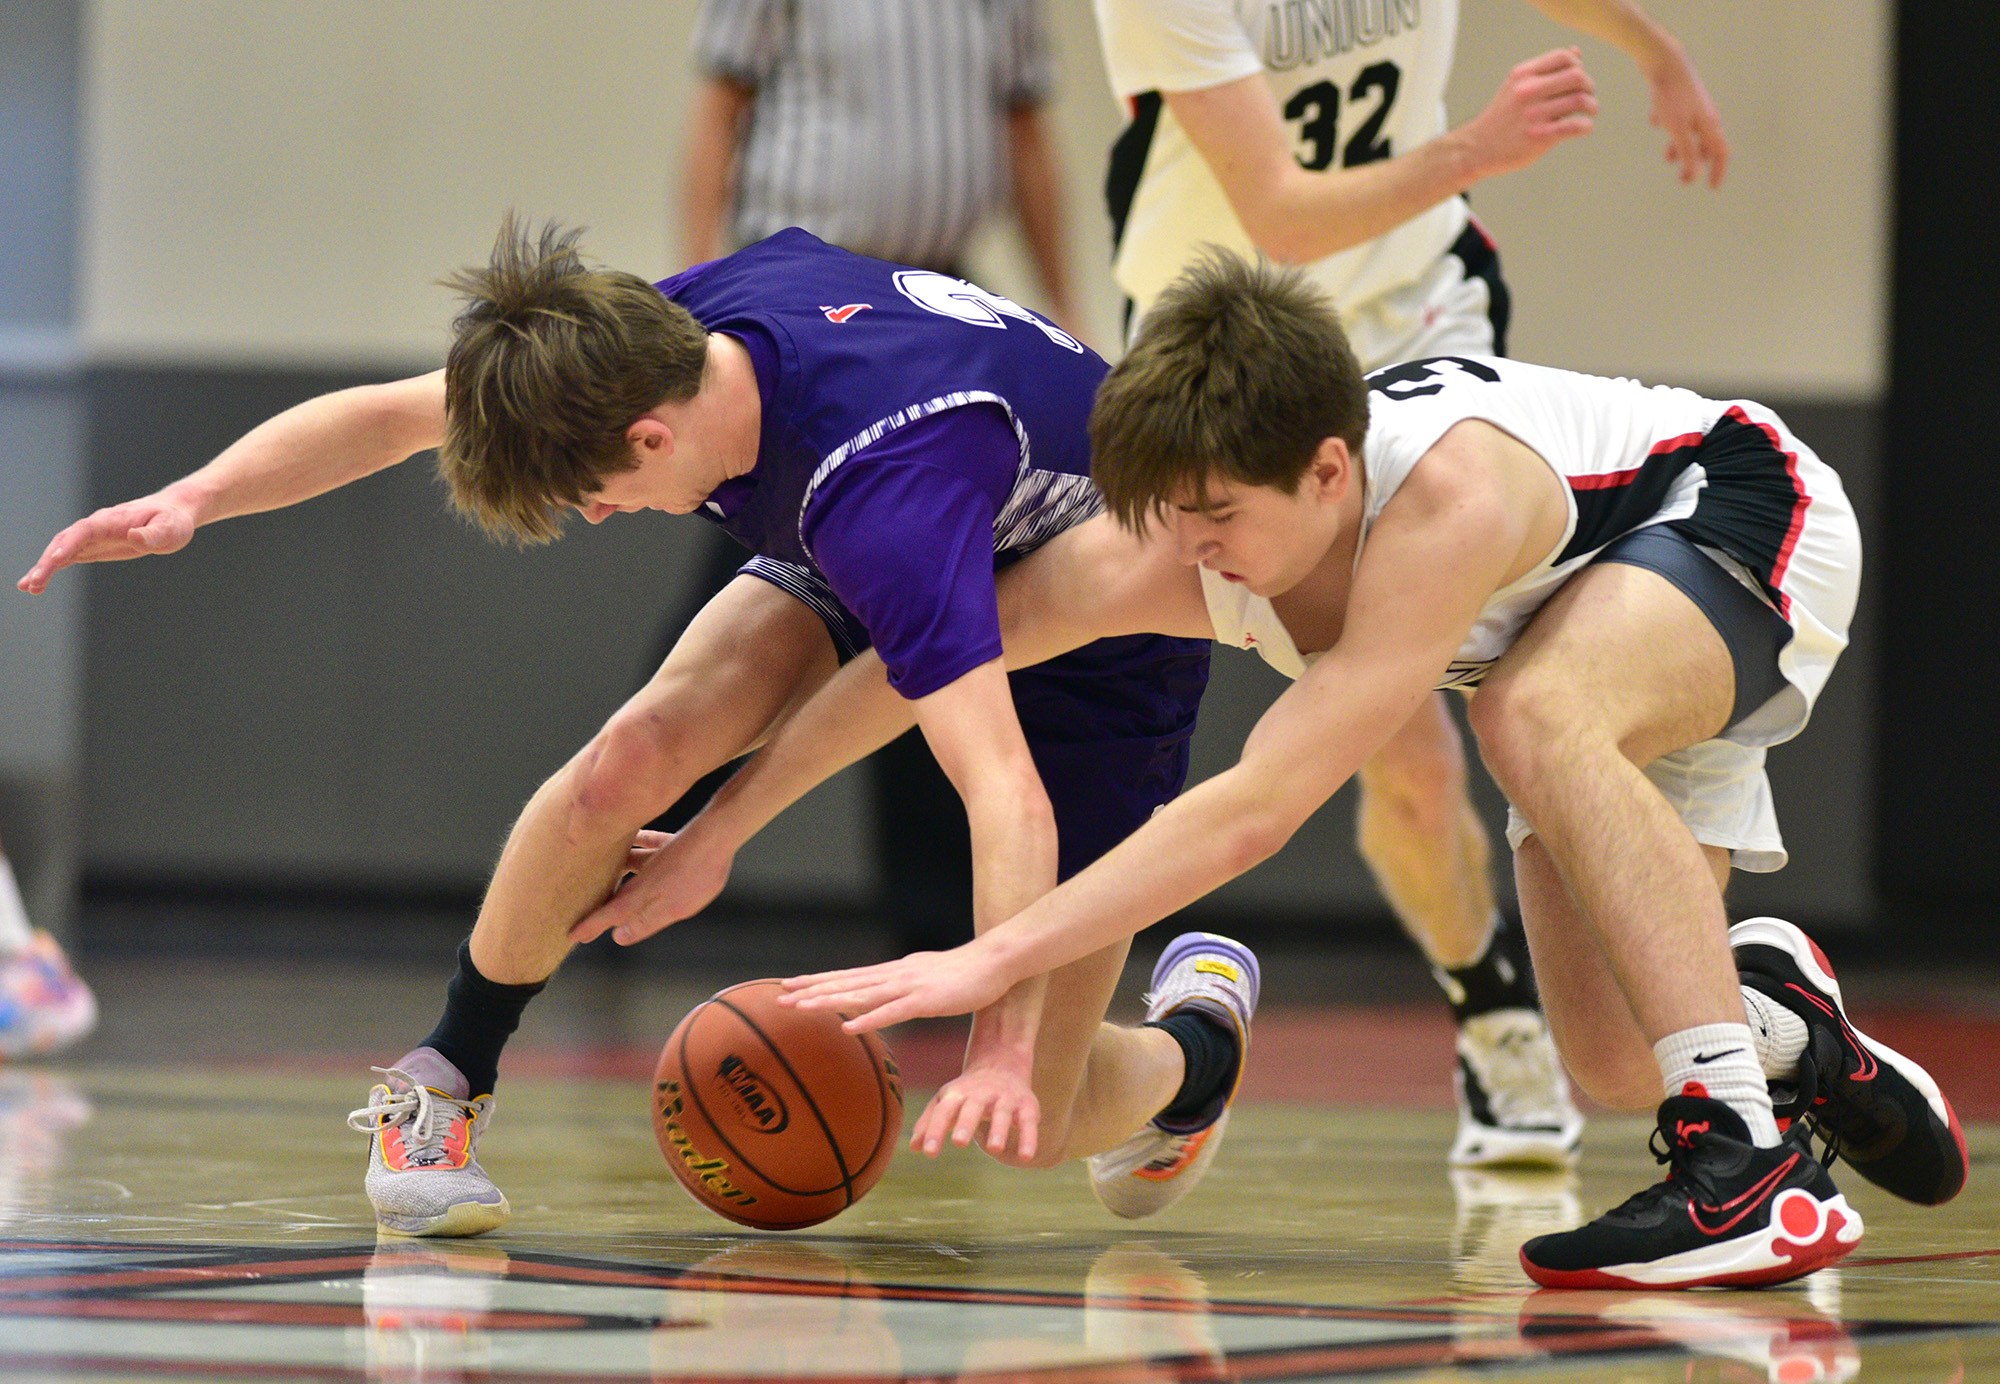 Union junior Tucker Dunseth, right, and Sumner senior Kaden Kastberg fight for a loose ball Saturday, Feb. 25, 2023, during the Titans’ 67-40 at Battle Ground High School.